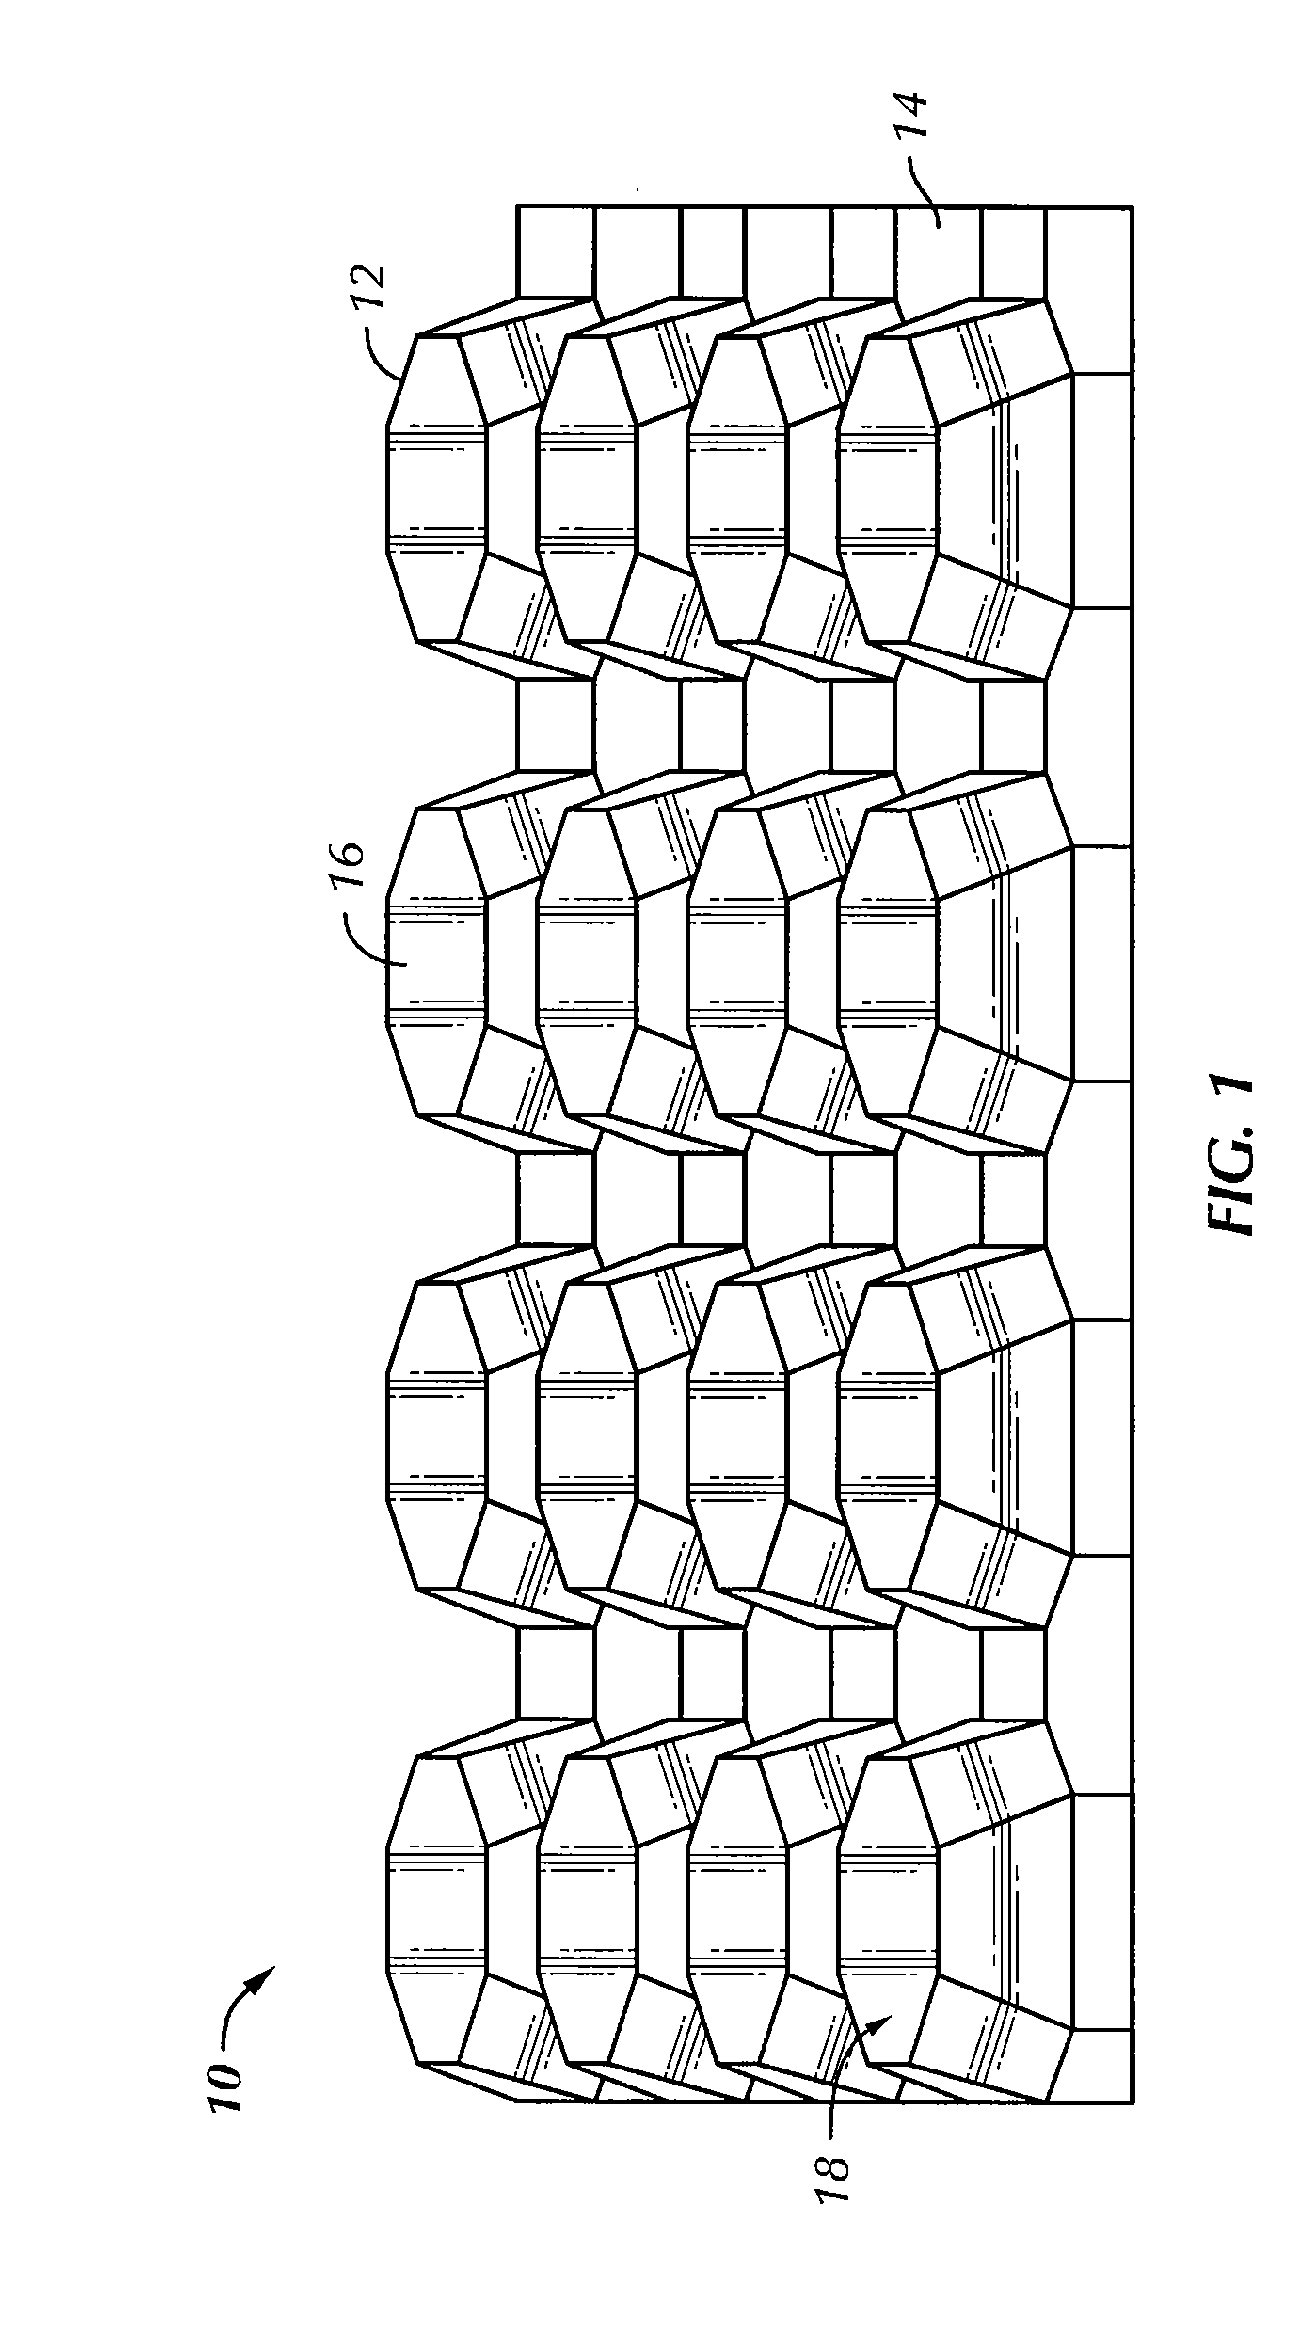 Formed core sandwich structure and method and system for making same